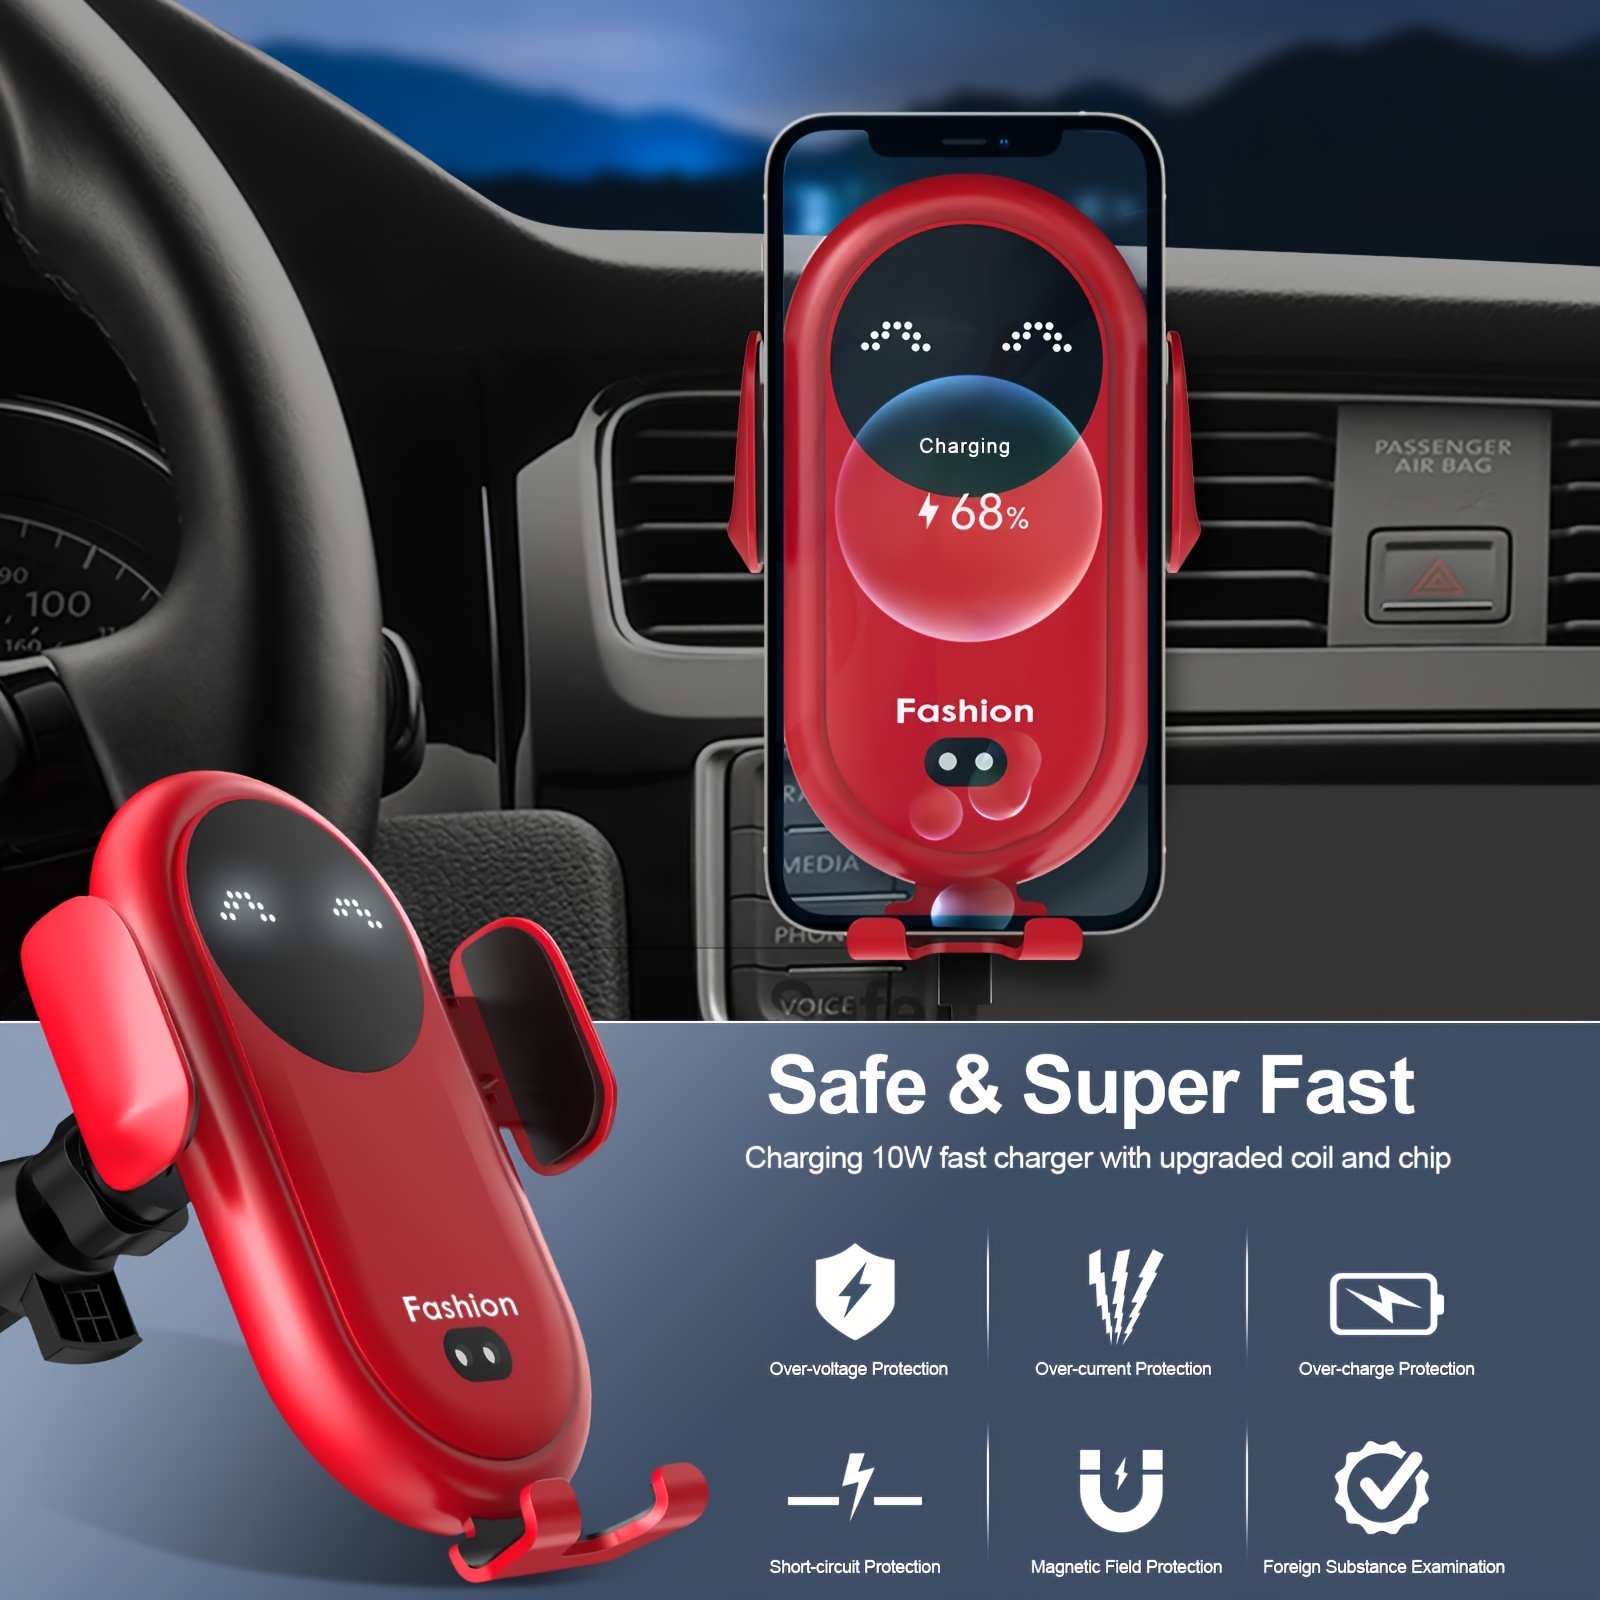 

Wireless , 15w Wireless Charger, Car Vent Holder, Fast Charging, Auto Clamping Car Phone Holder